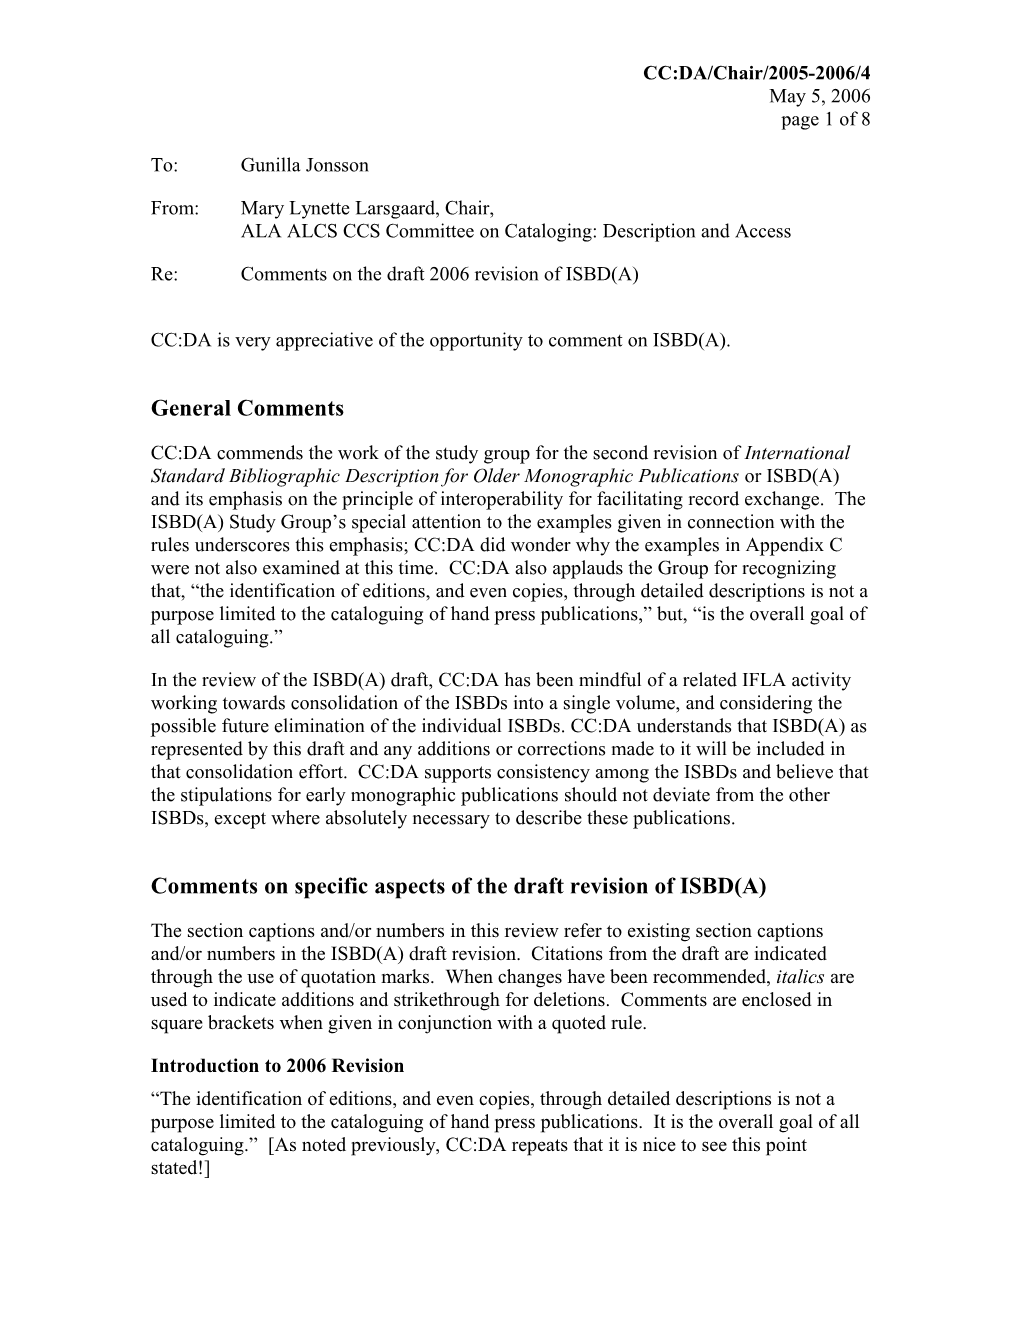 Comments on the Draft 2006 Revision of ISBD(A)